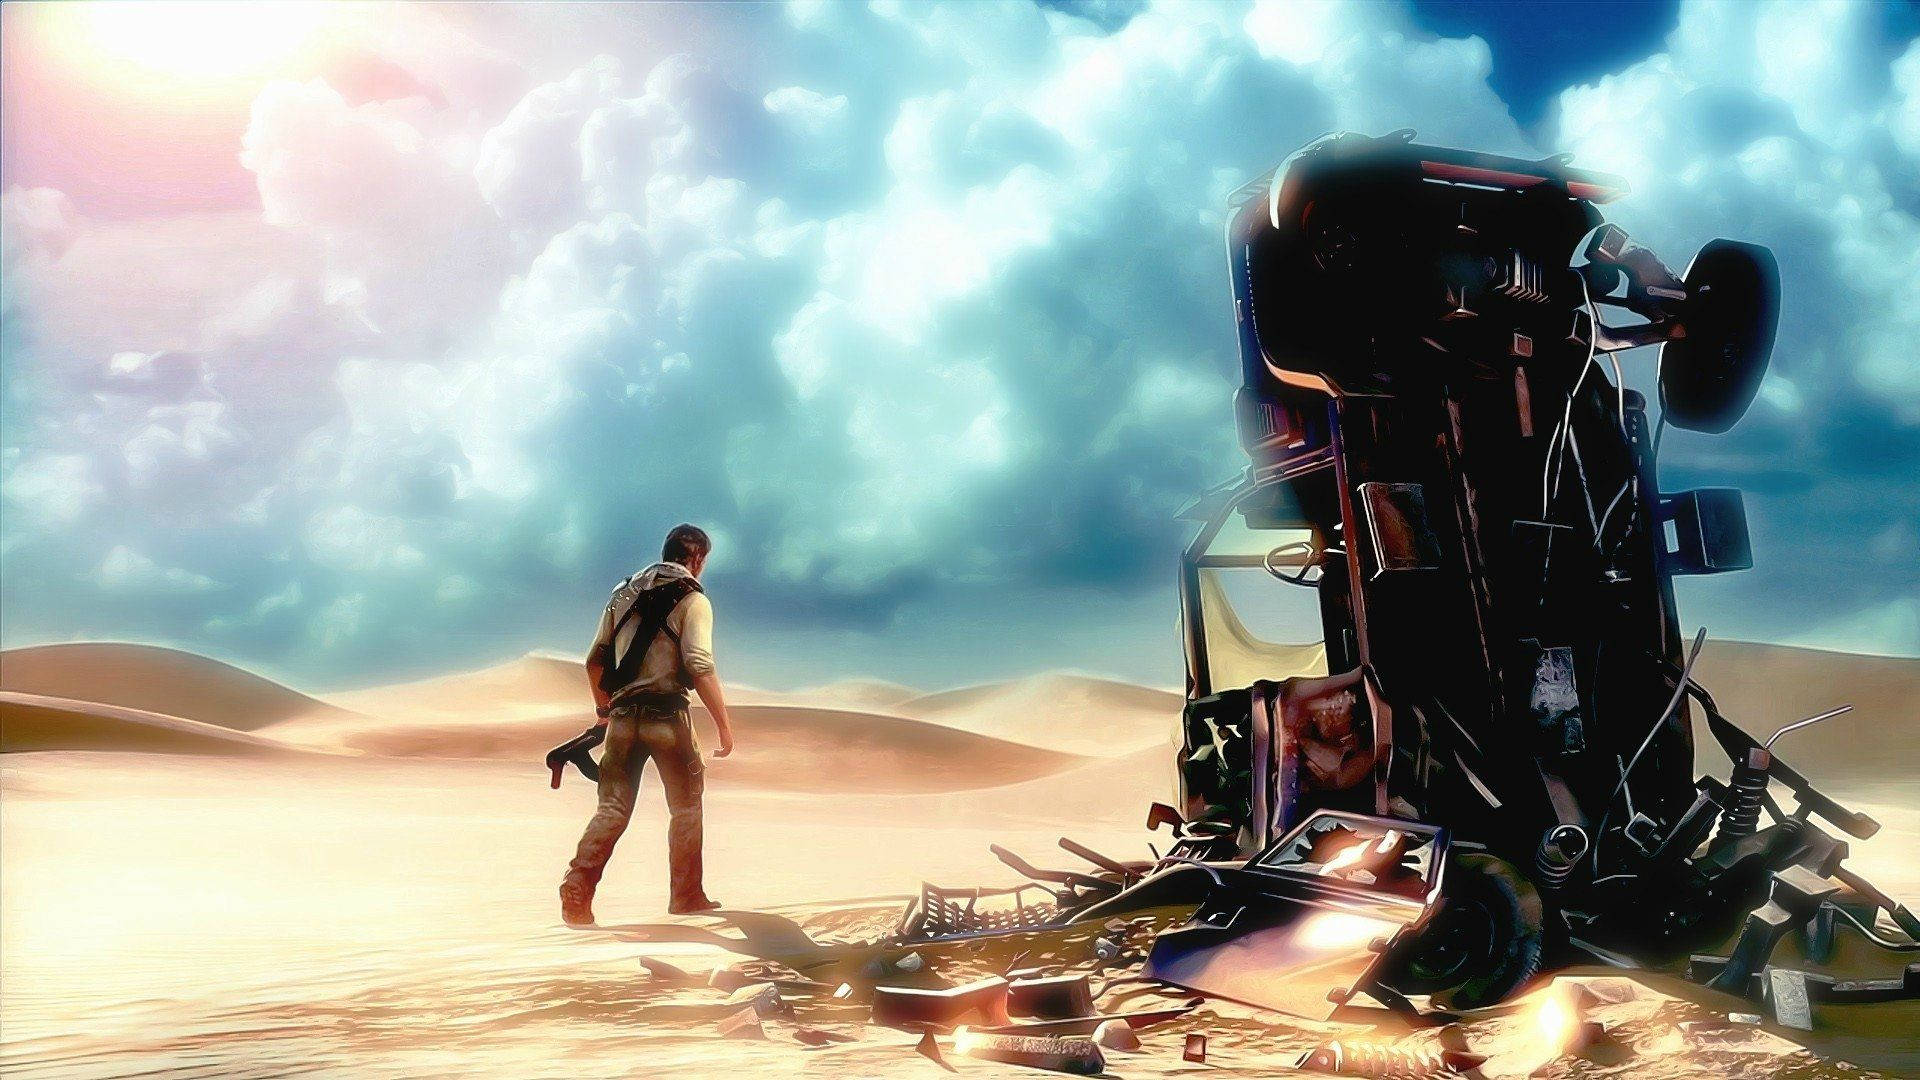 Uncharted's Protagonist Nathan Drake Next To A Crashed Car. Background